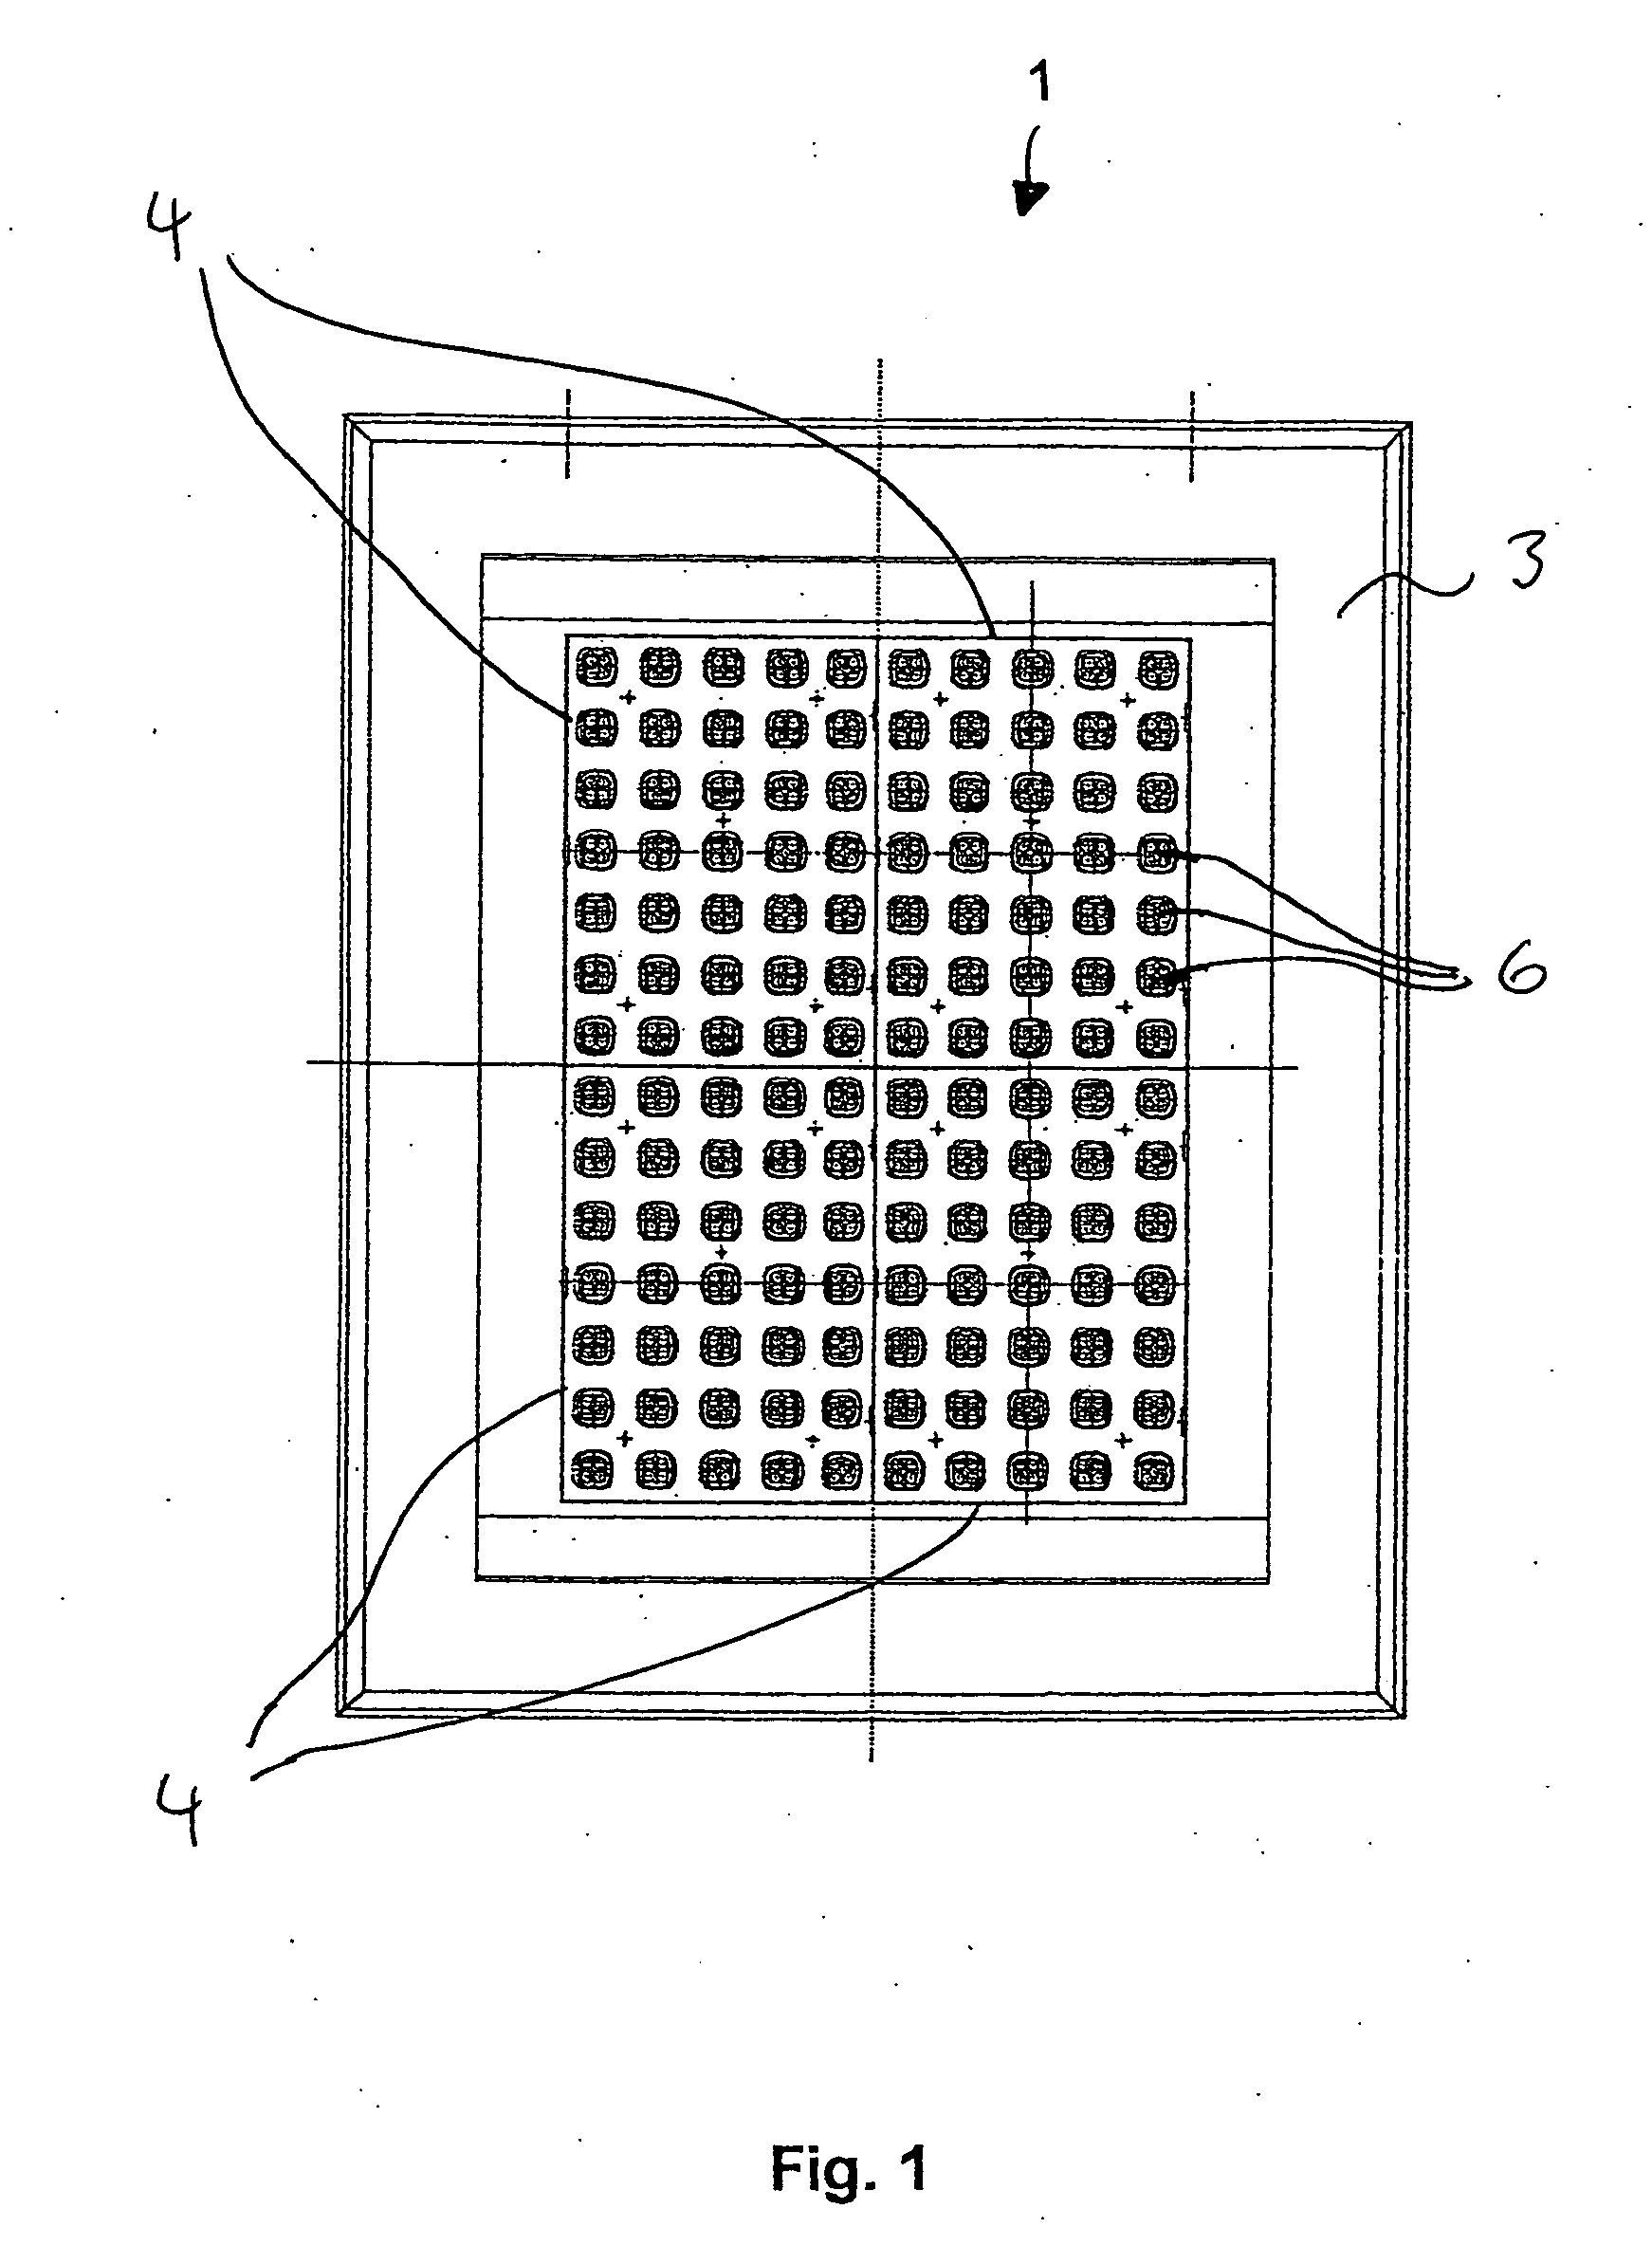 Modular display device and tool for removing display modules